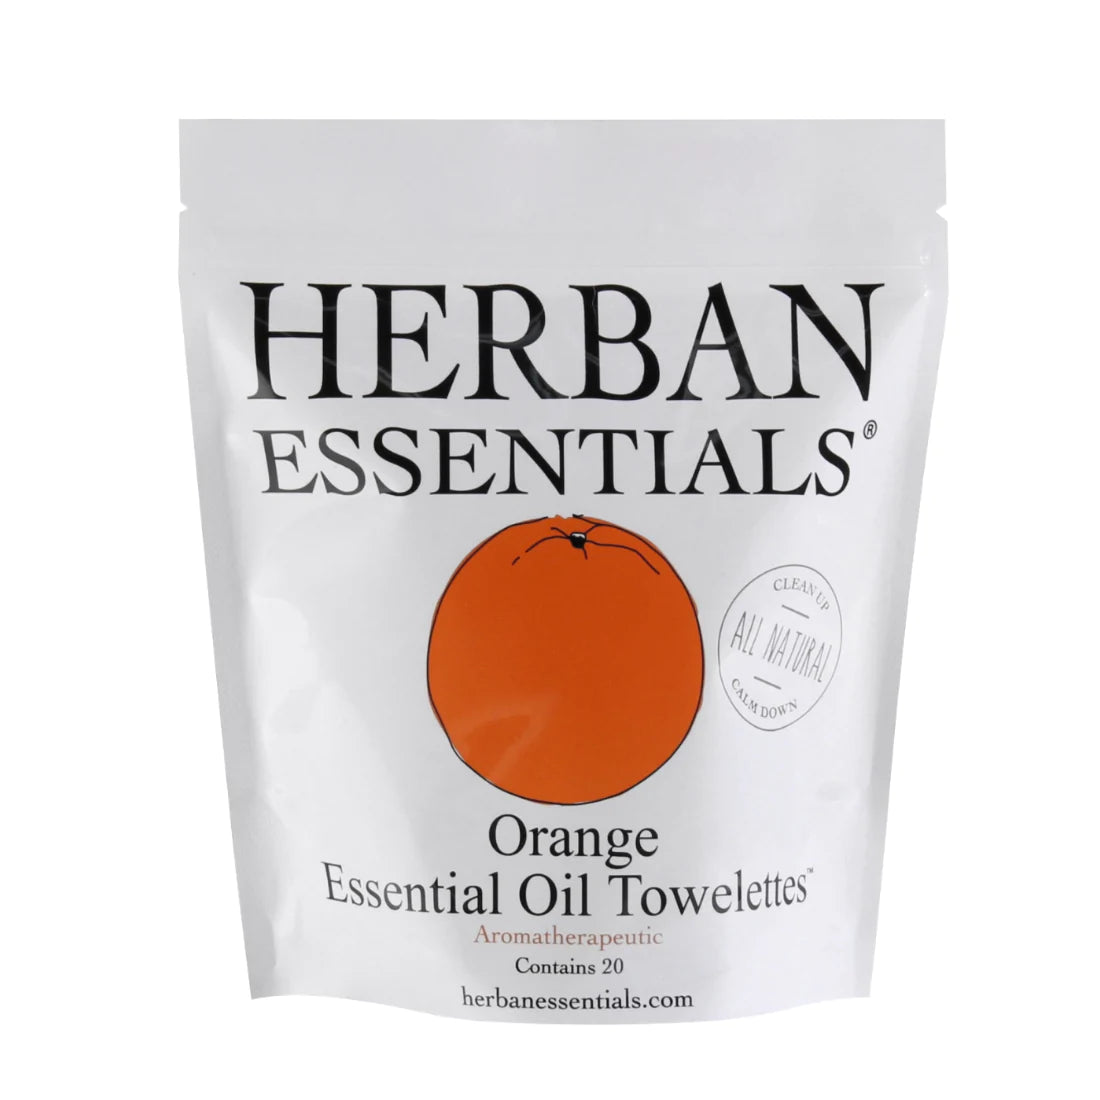 A white pouch labeled "Herban Essentials" with "Herban Essentials Essential Oil Towelettes - Orange Mini-Bag" in black text and an orange circle on the front, illustrating the scent. Contains 20 wipes enriched with a